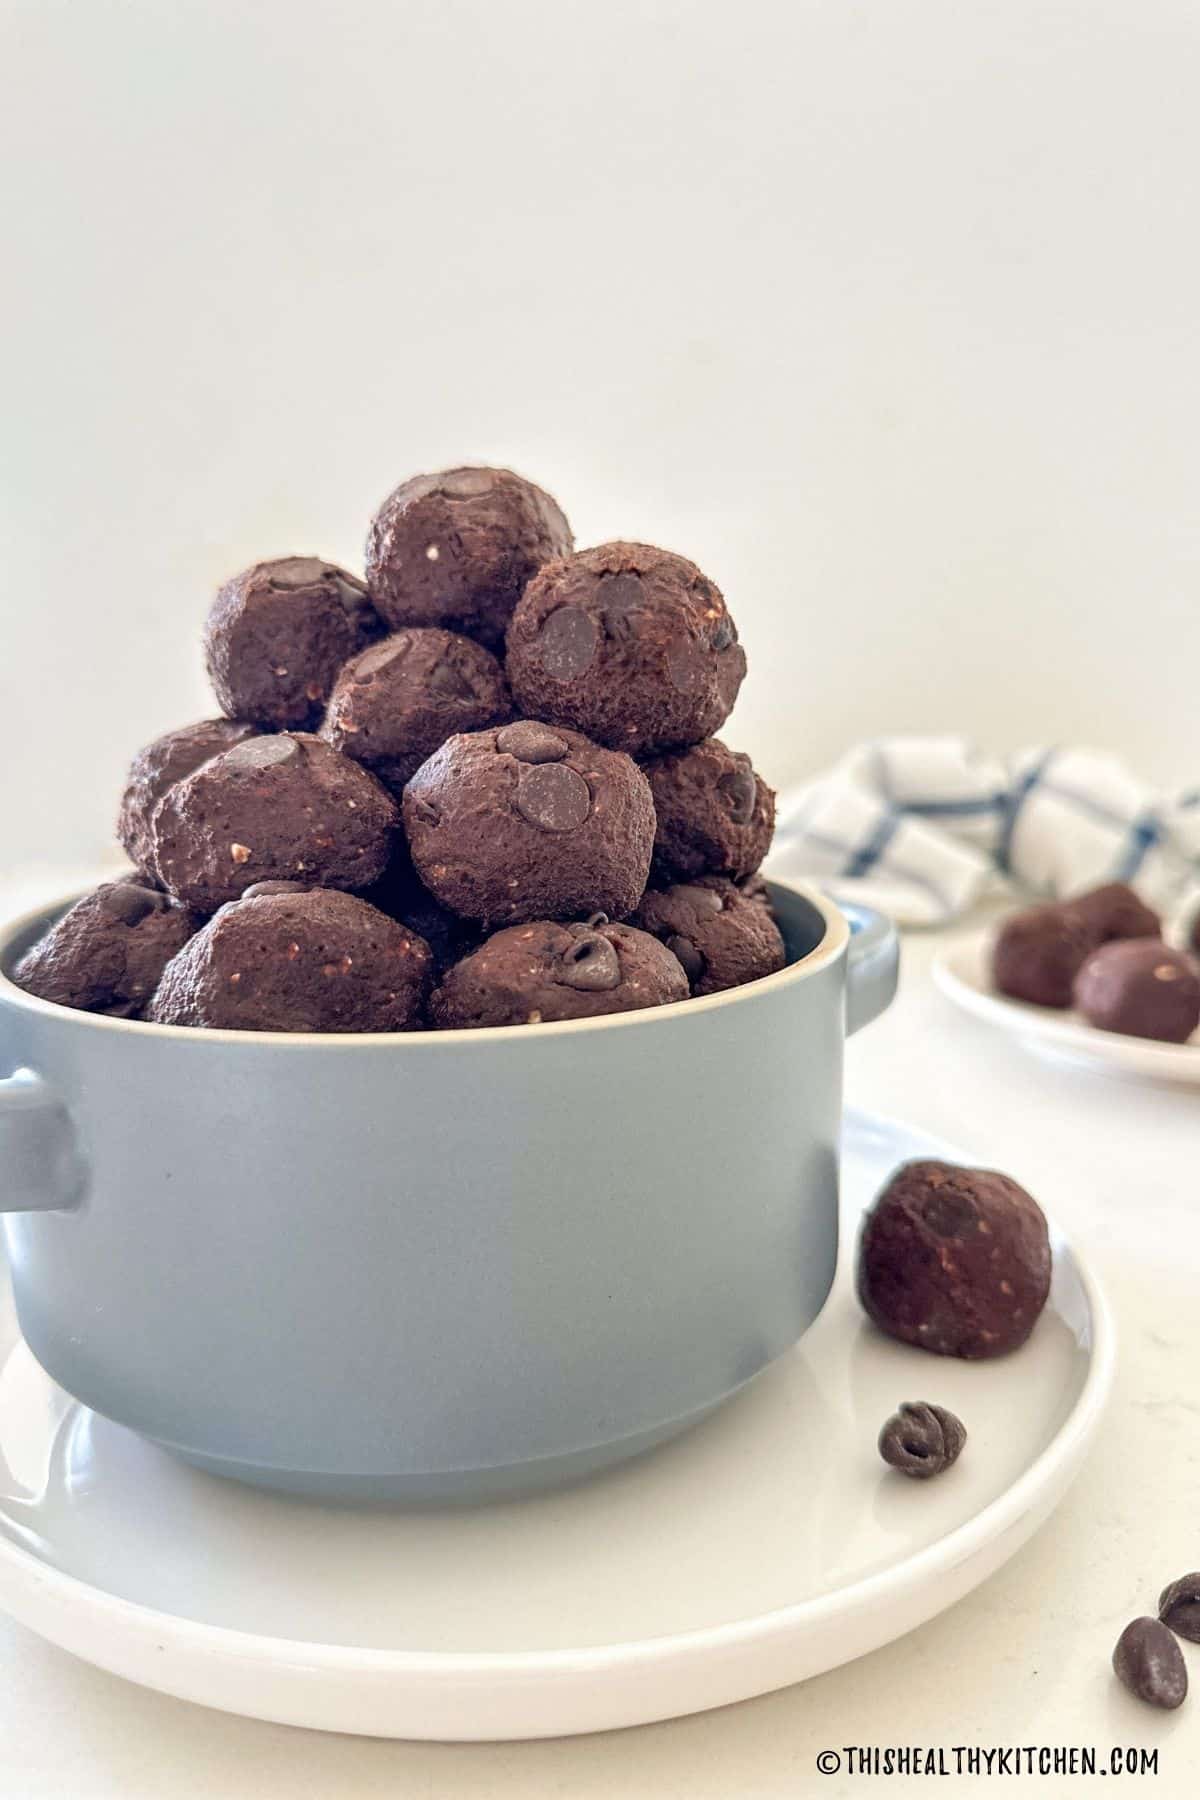 Double chocolate bliss balls stacked inside blue serving bowl.